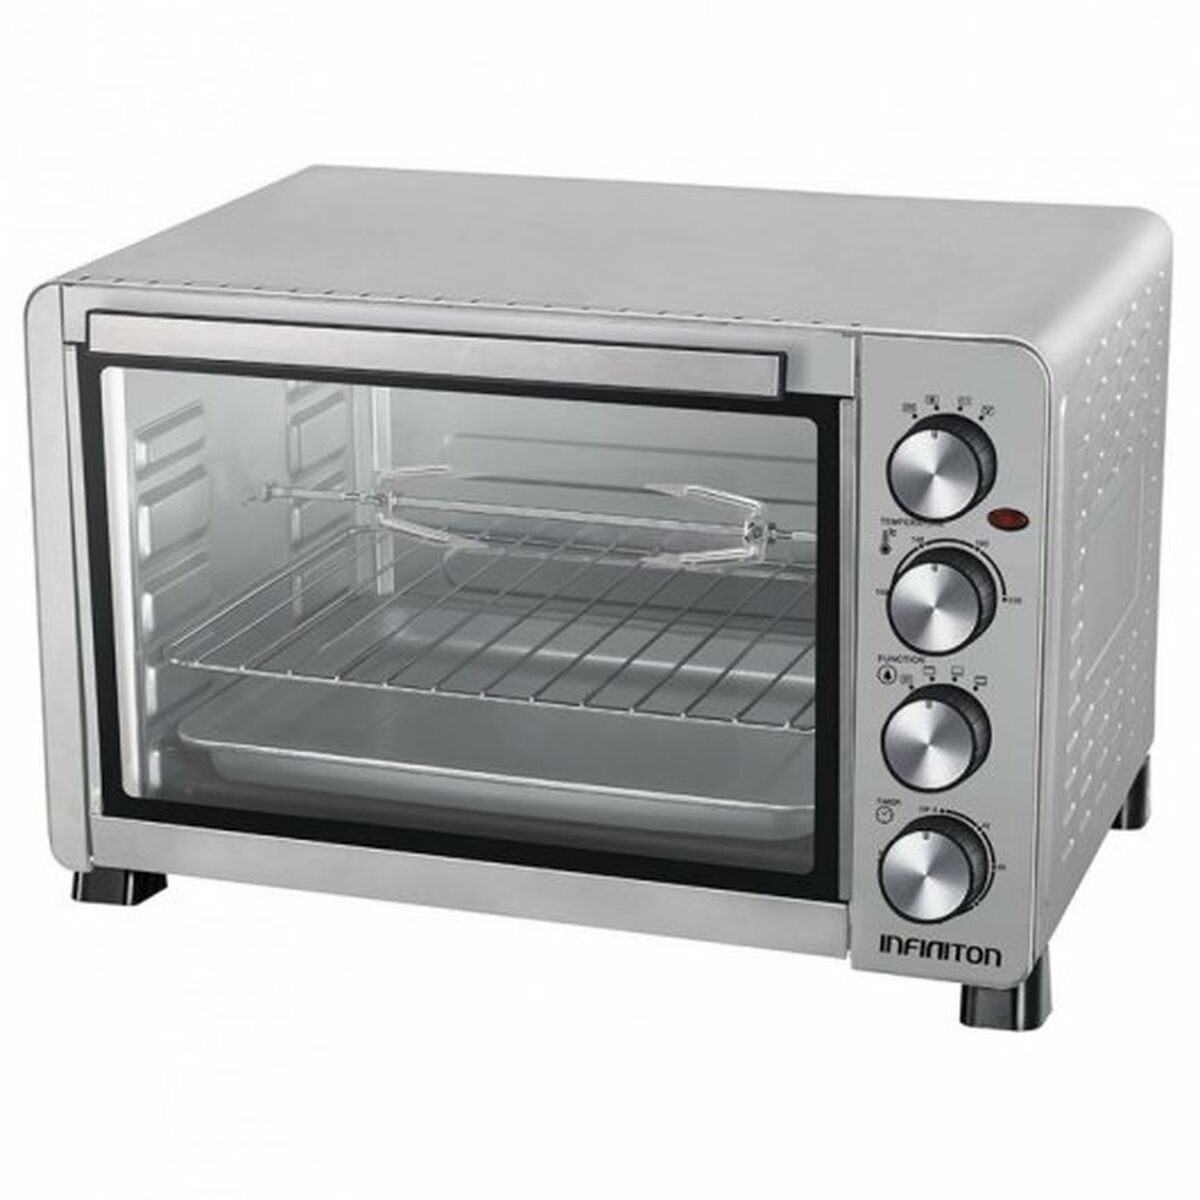 Convection Oven Infiniton HSM-32SN47 2000 W 45 L